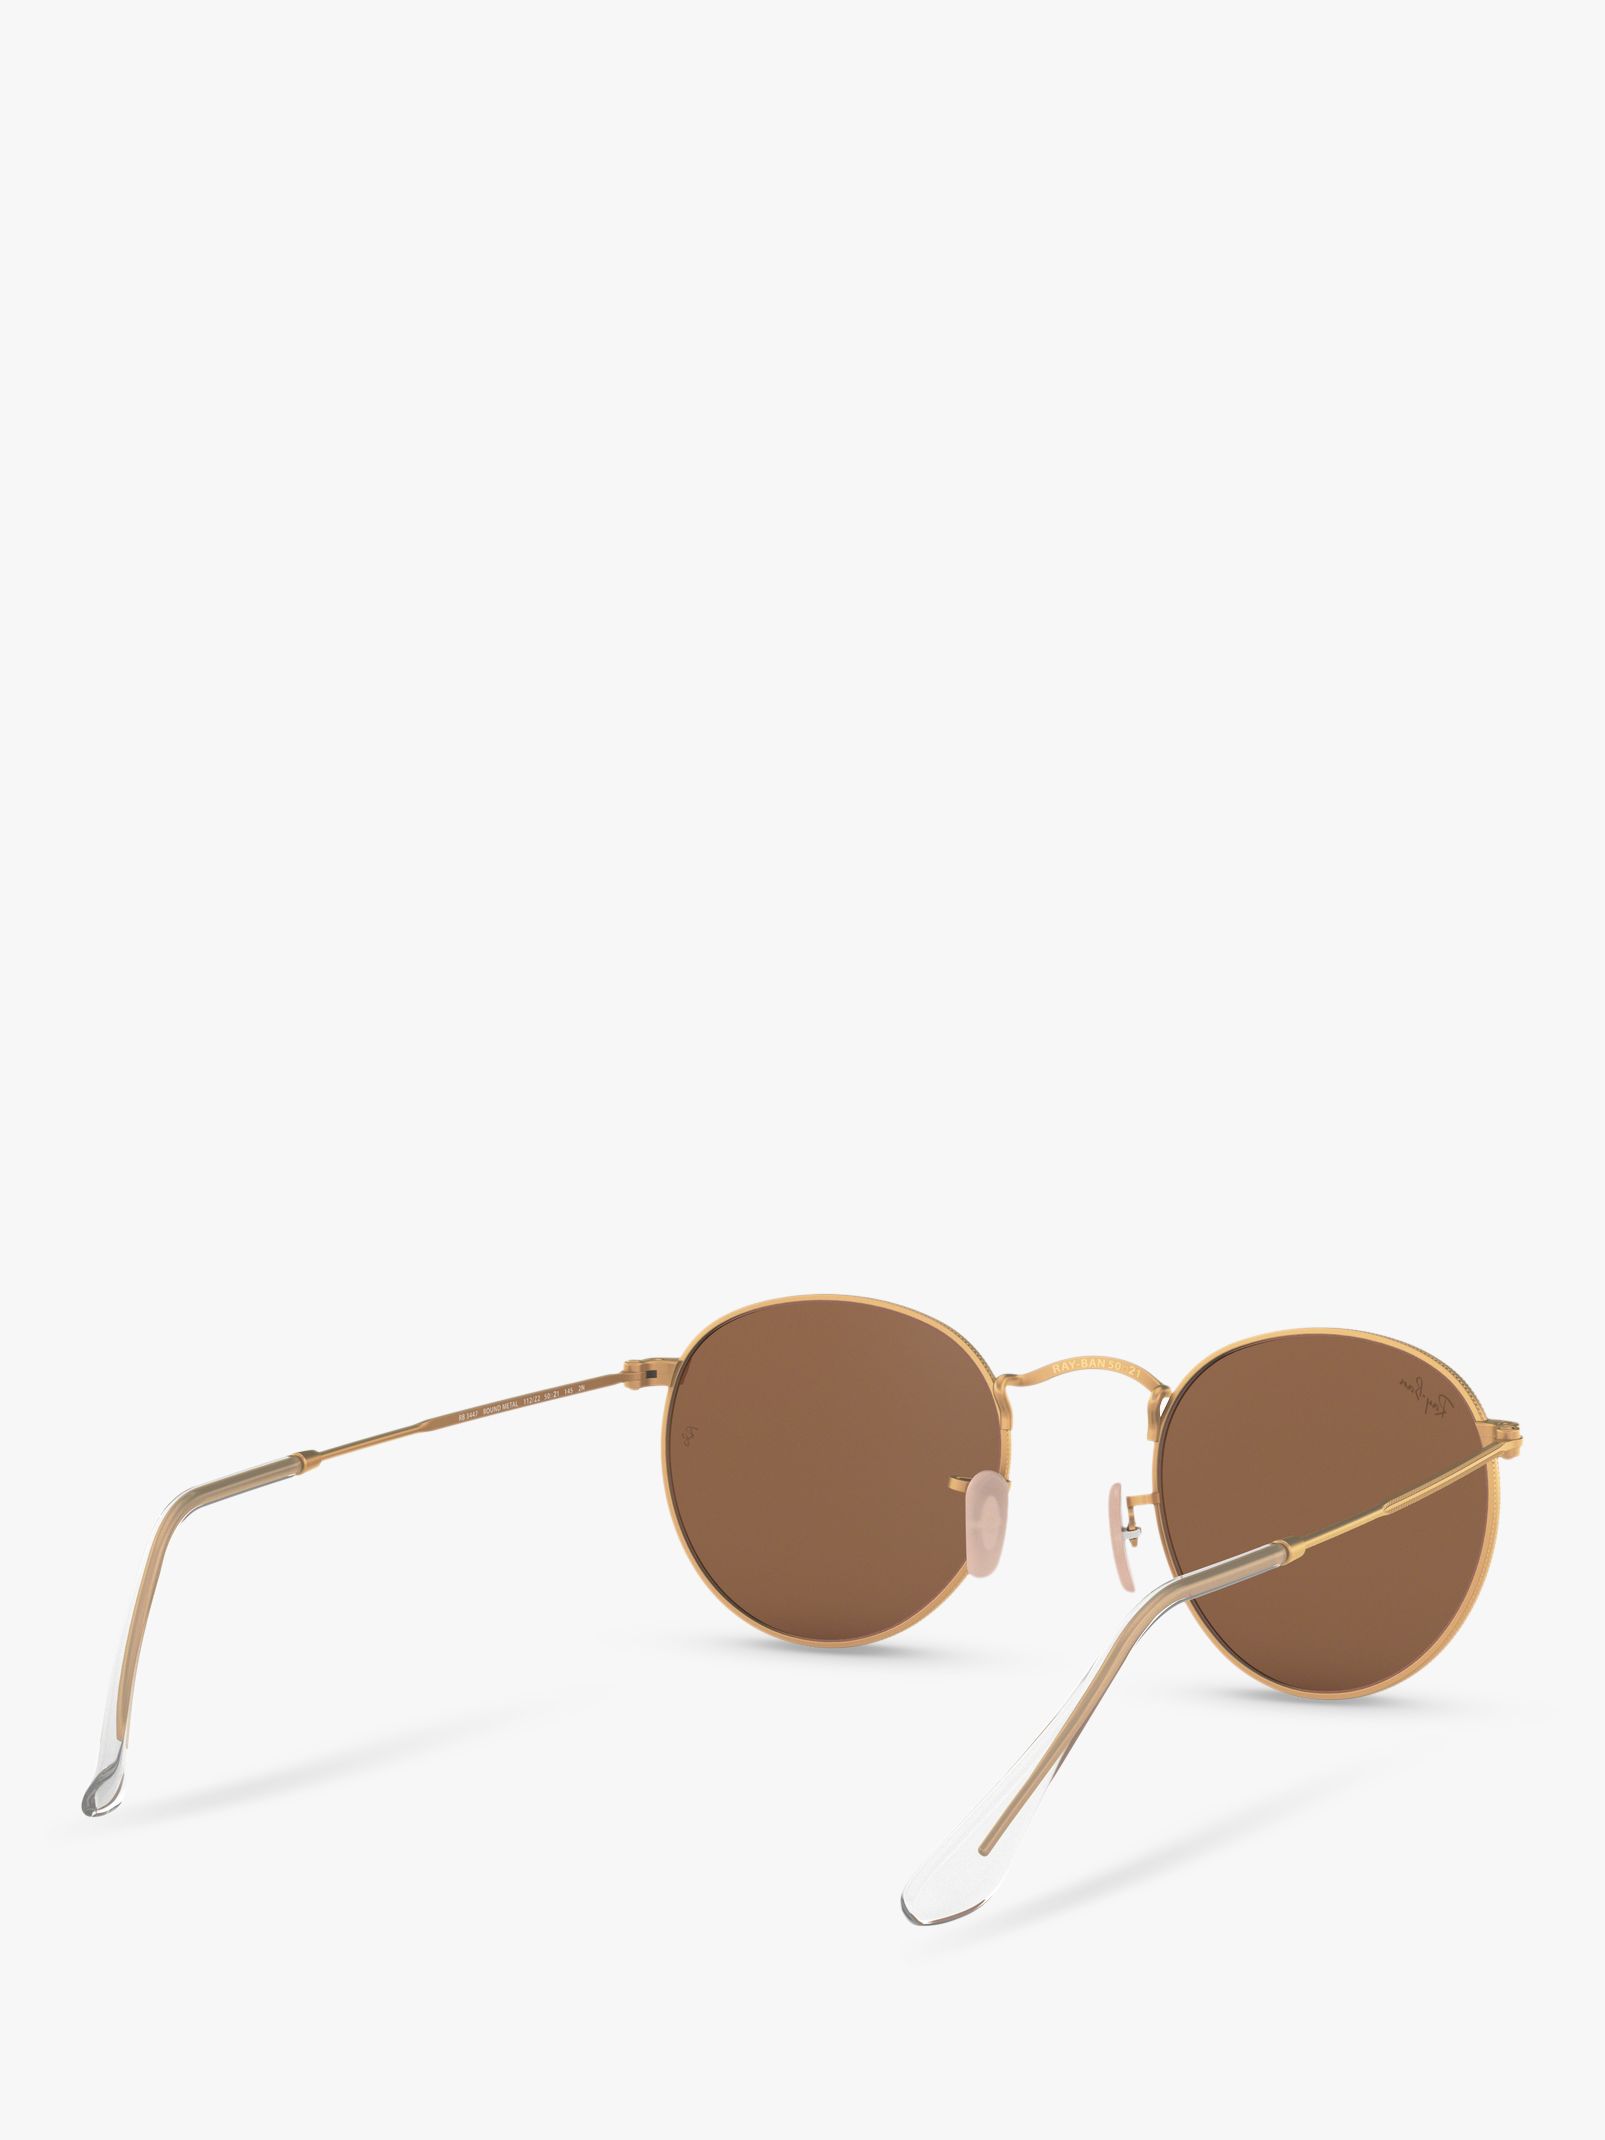 Buy Ray-Ban RB3447 Men's Round Flash Sunglasses, Gold/Mirror Pink Online at johnlewis.com